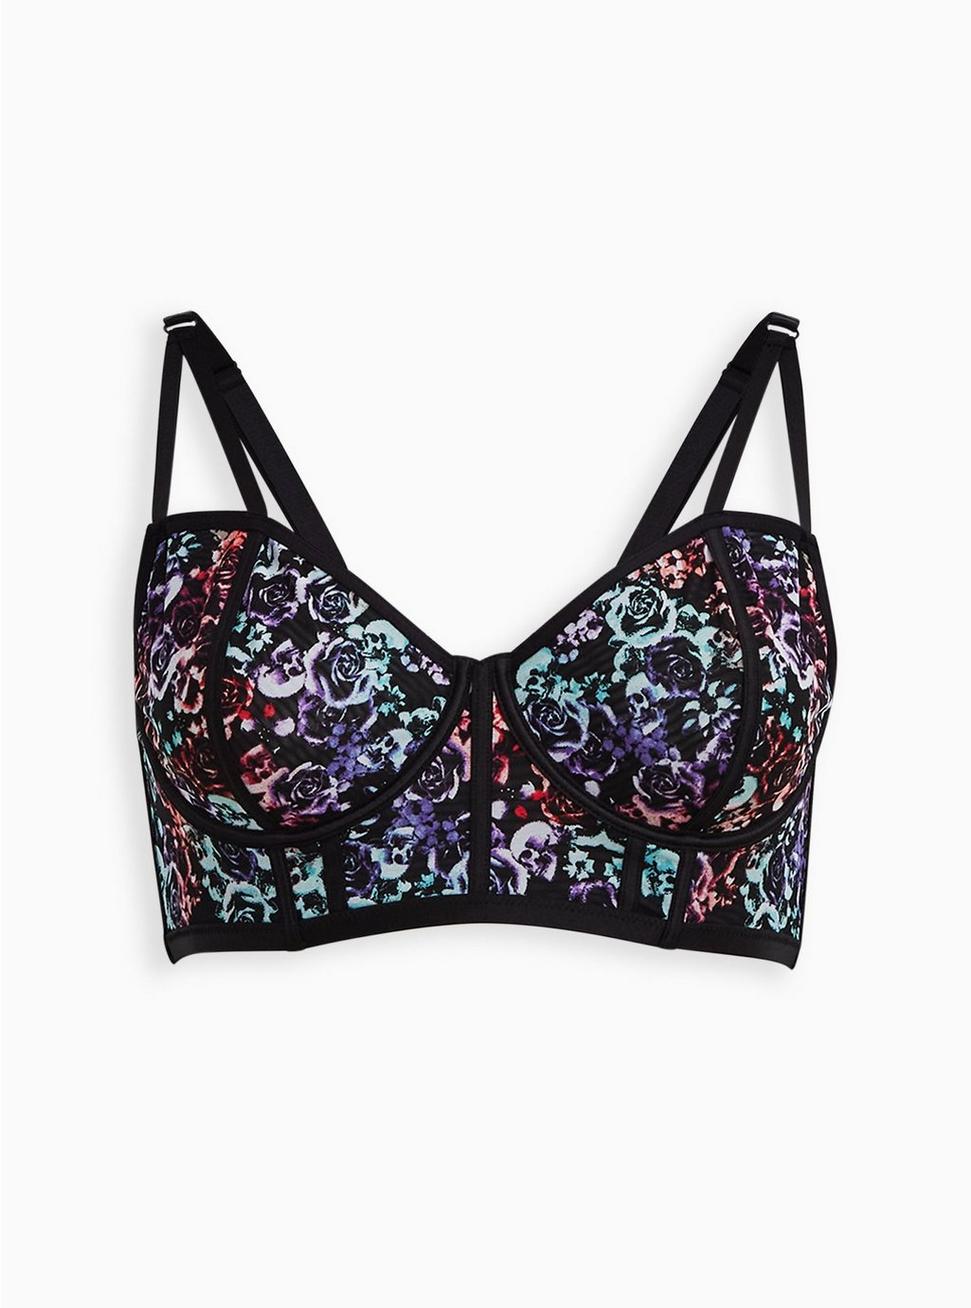 Plus Size Simply Mesh Strappy Underwire Bra, MIRRORED SKULL FLORAL, hi-res